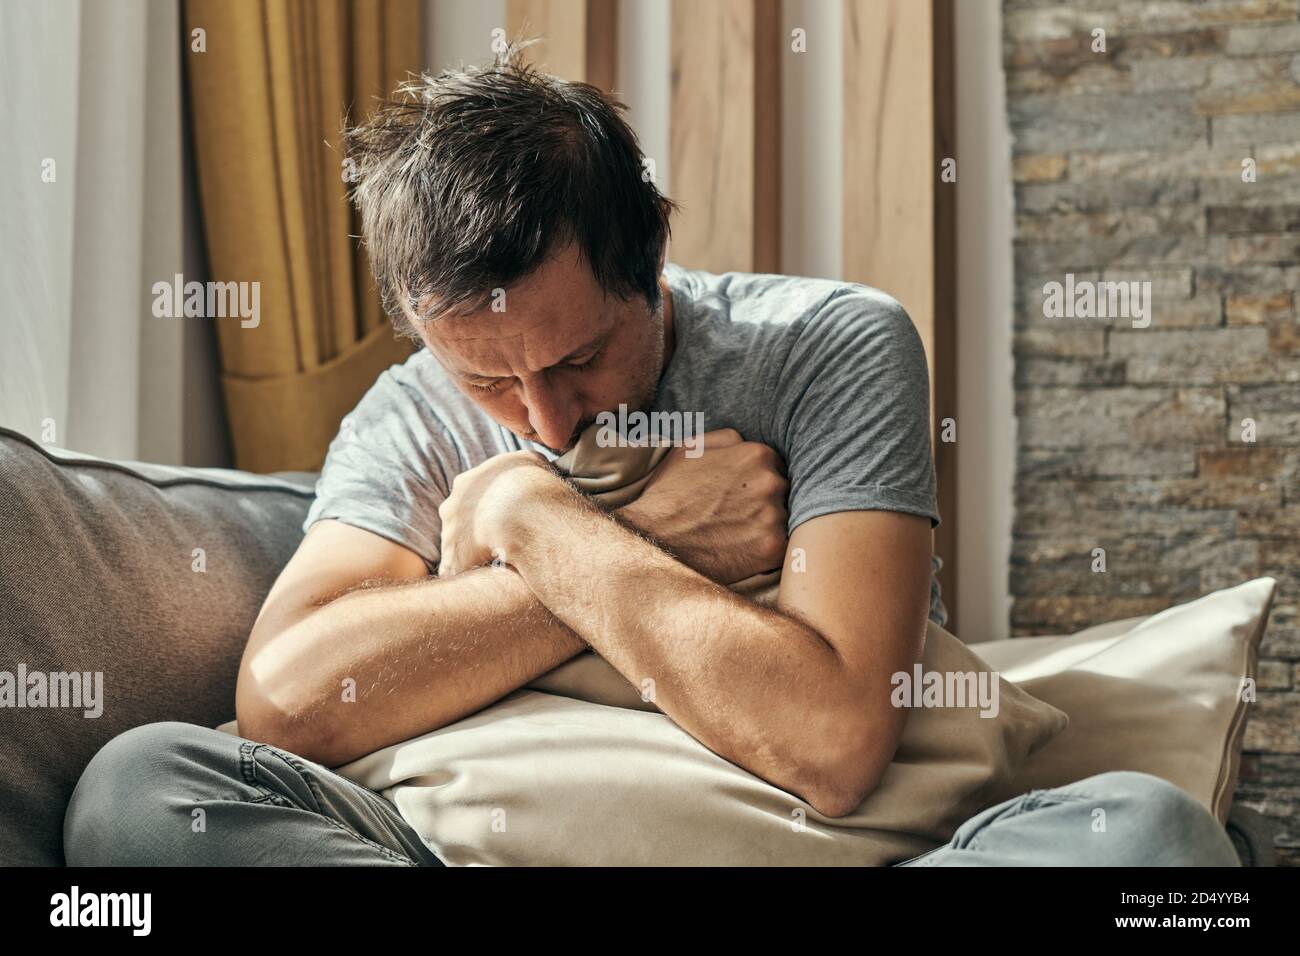 Depressed man sitting on living room sofa and hugging pillow, portrait of adult male having anxiety attack Stock Photo